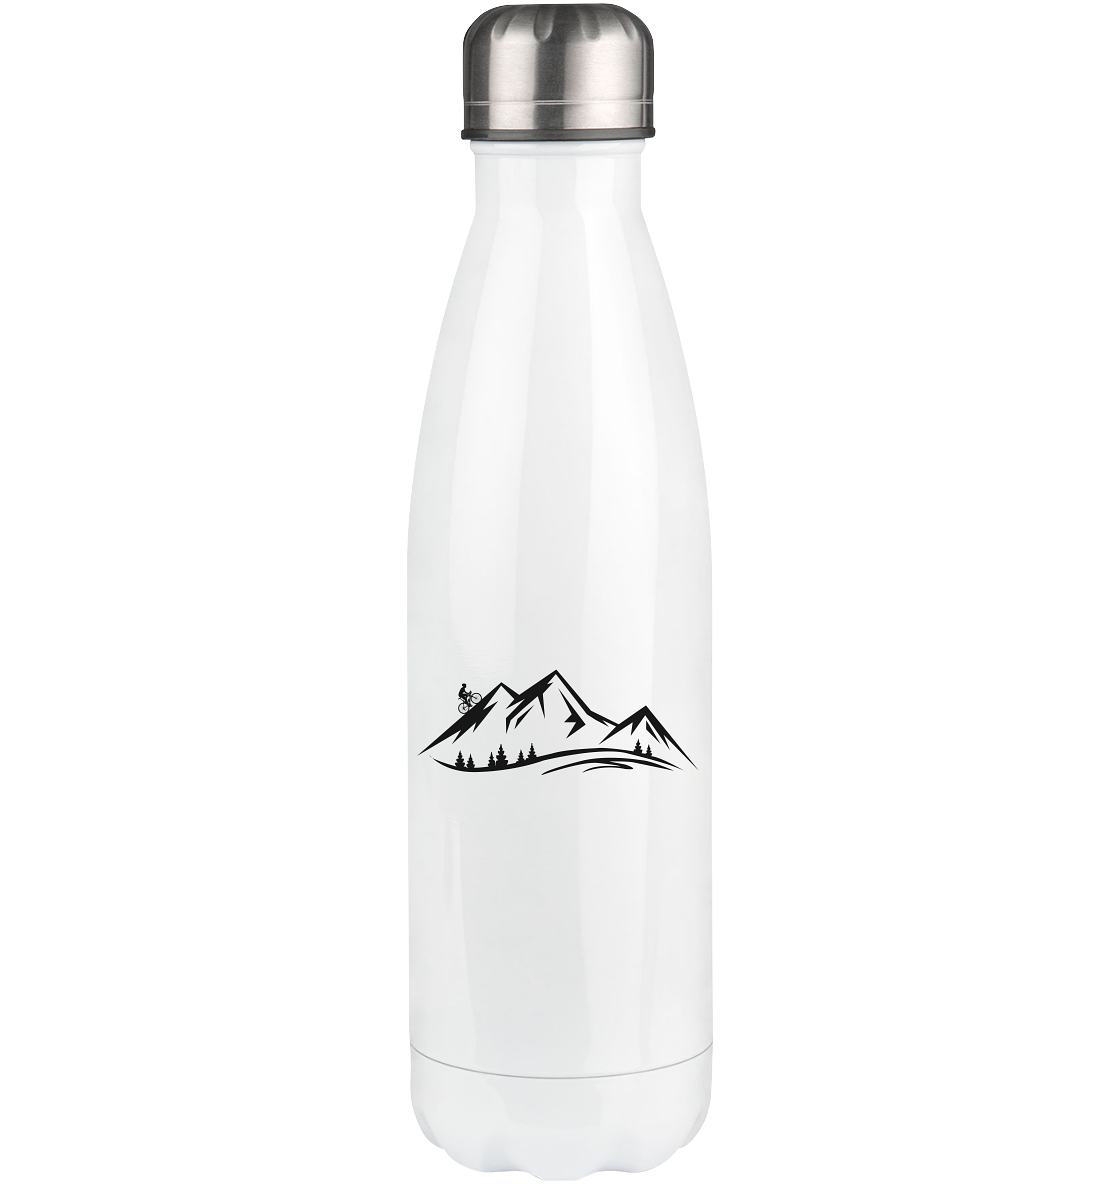 Mountain and Cycling - Edelstahl Thermosflasche fahrrad 500ml